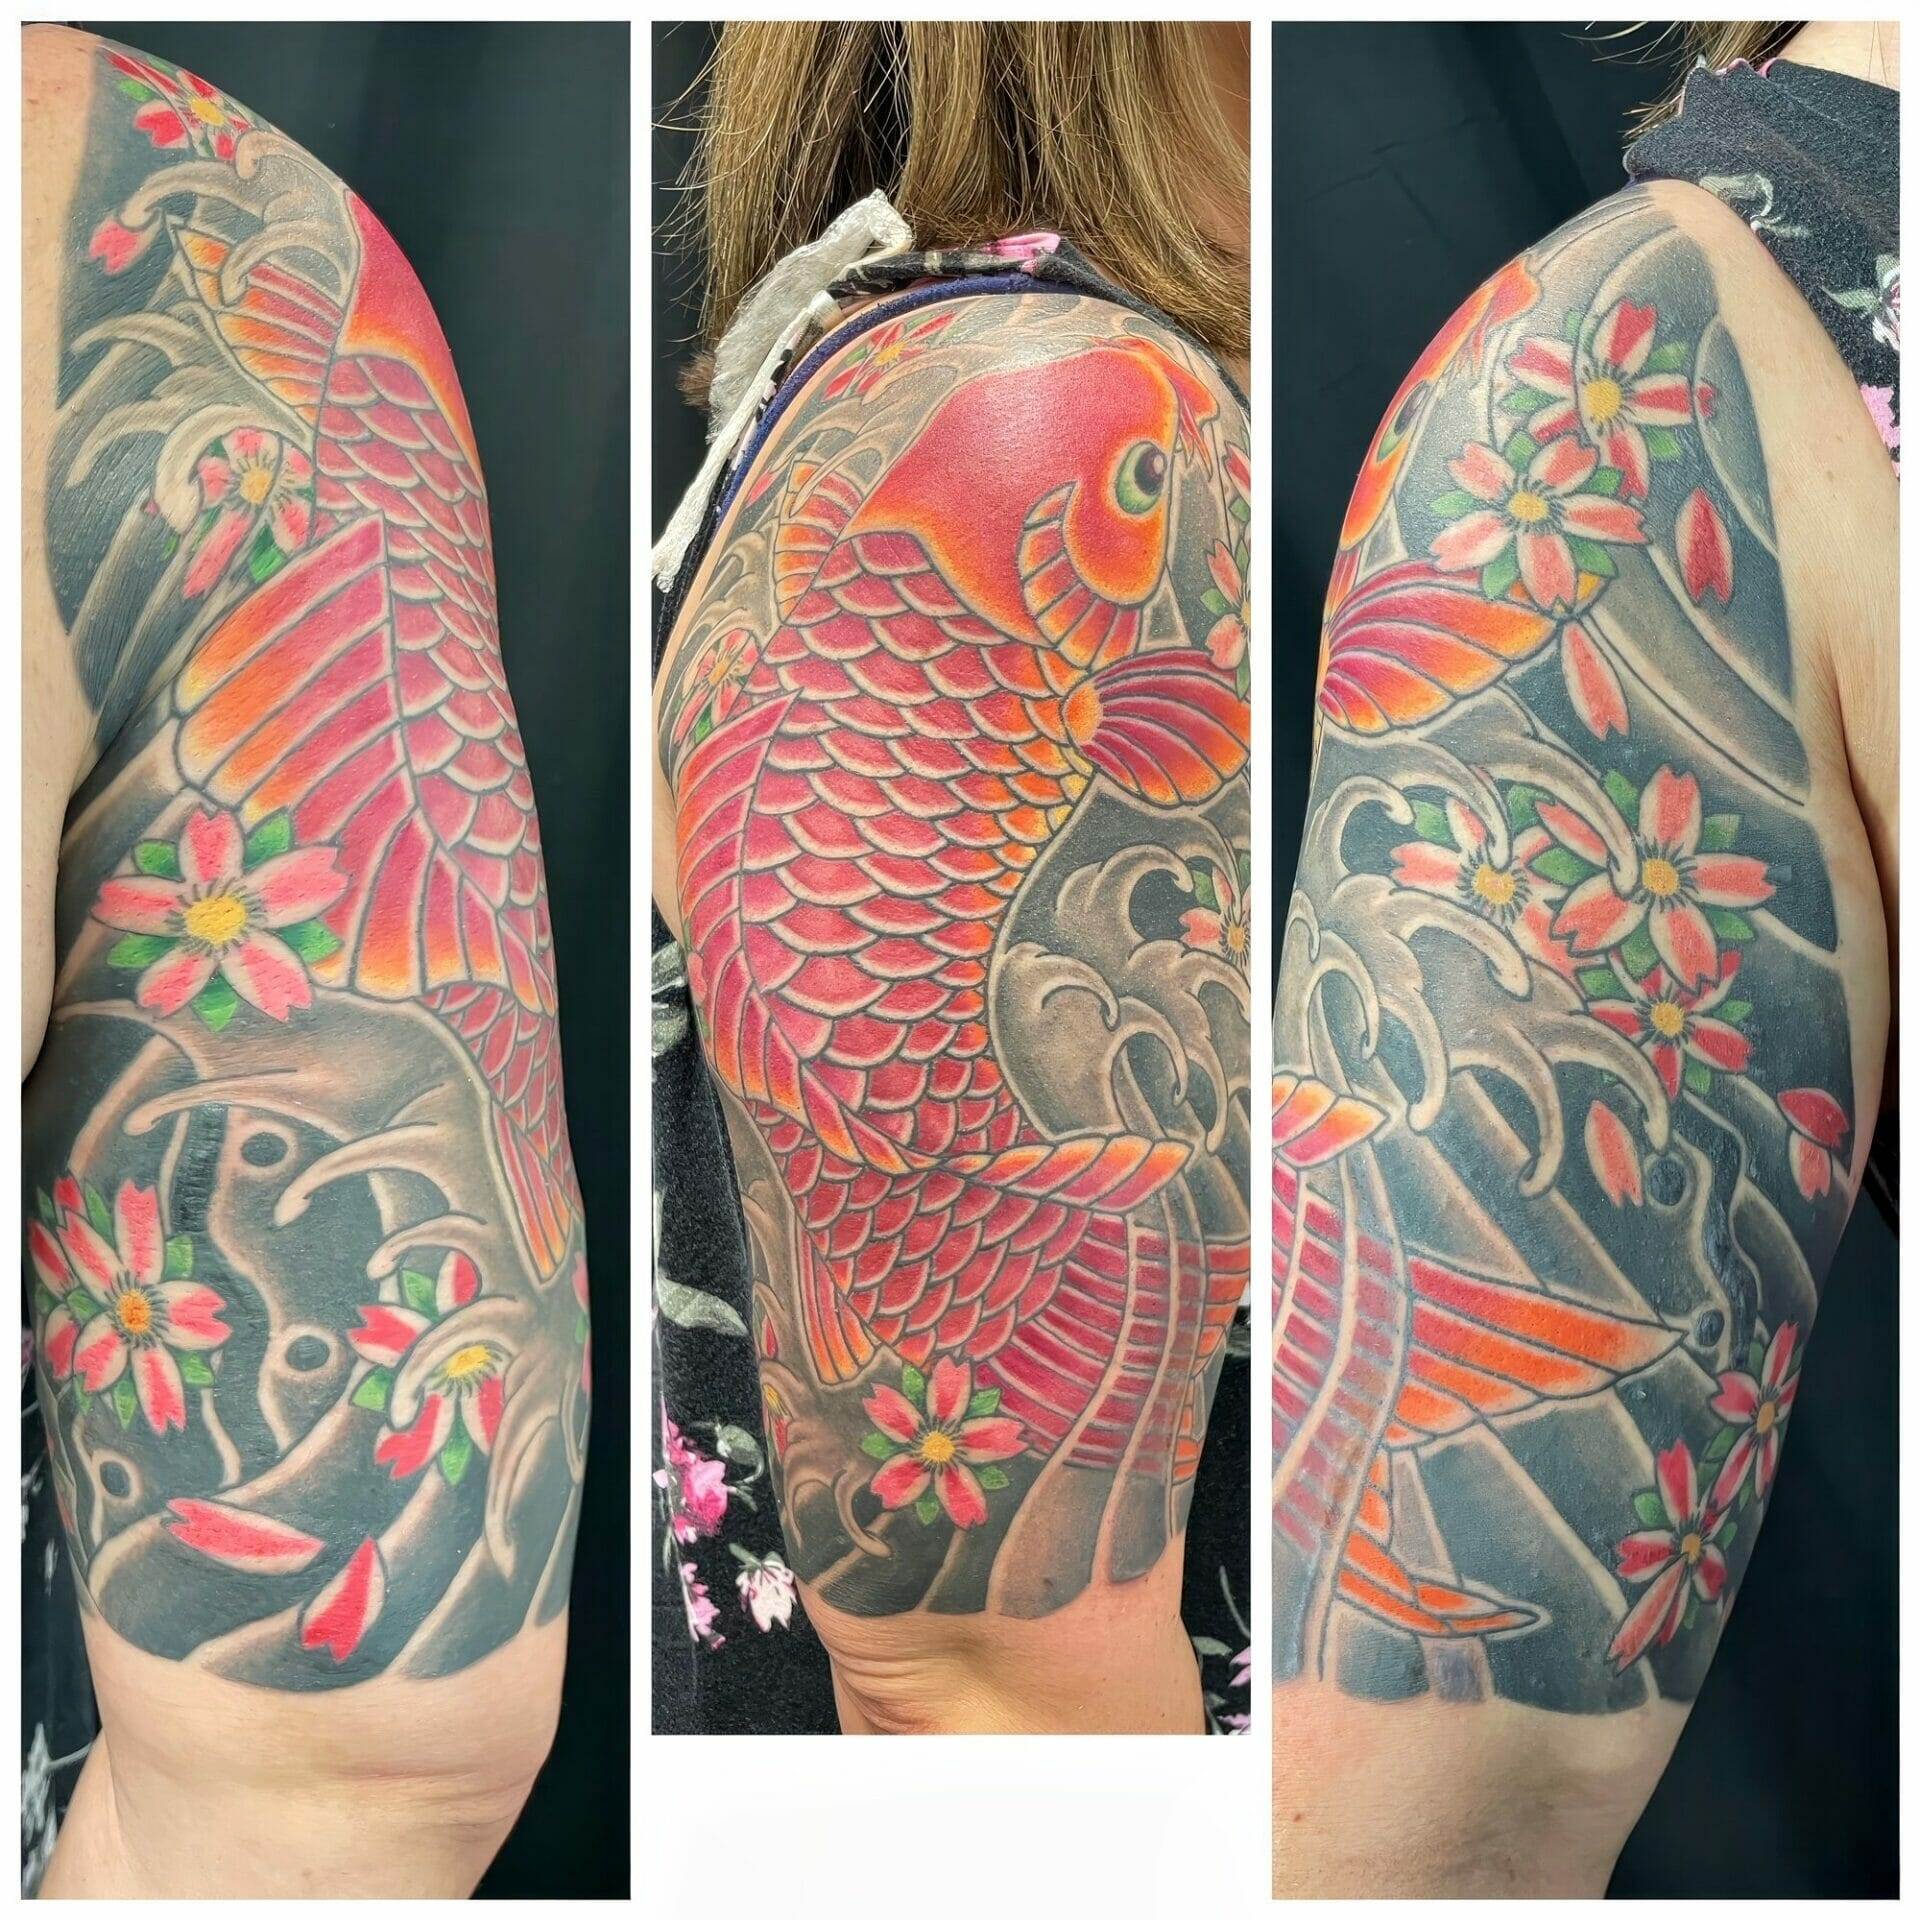 Modern tattoo design with various animals and geometric shapes on Craiyon